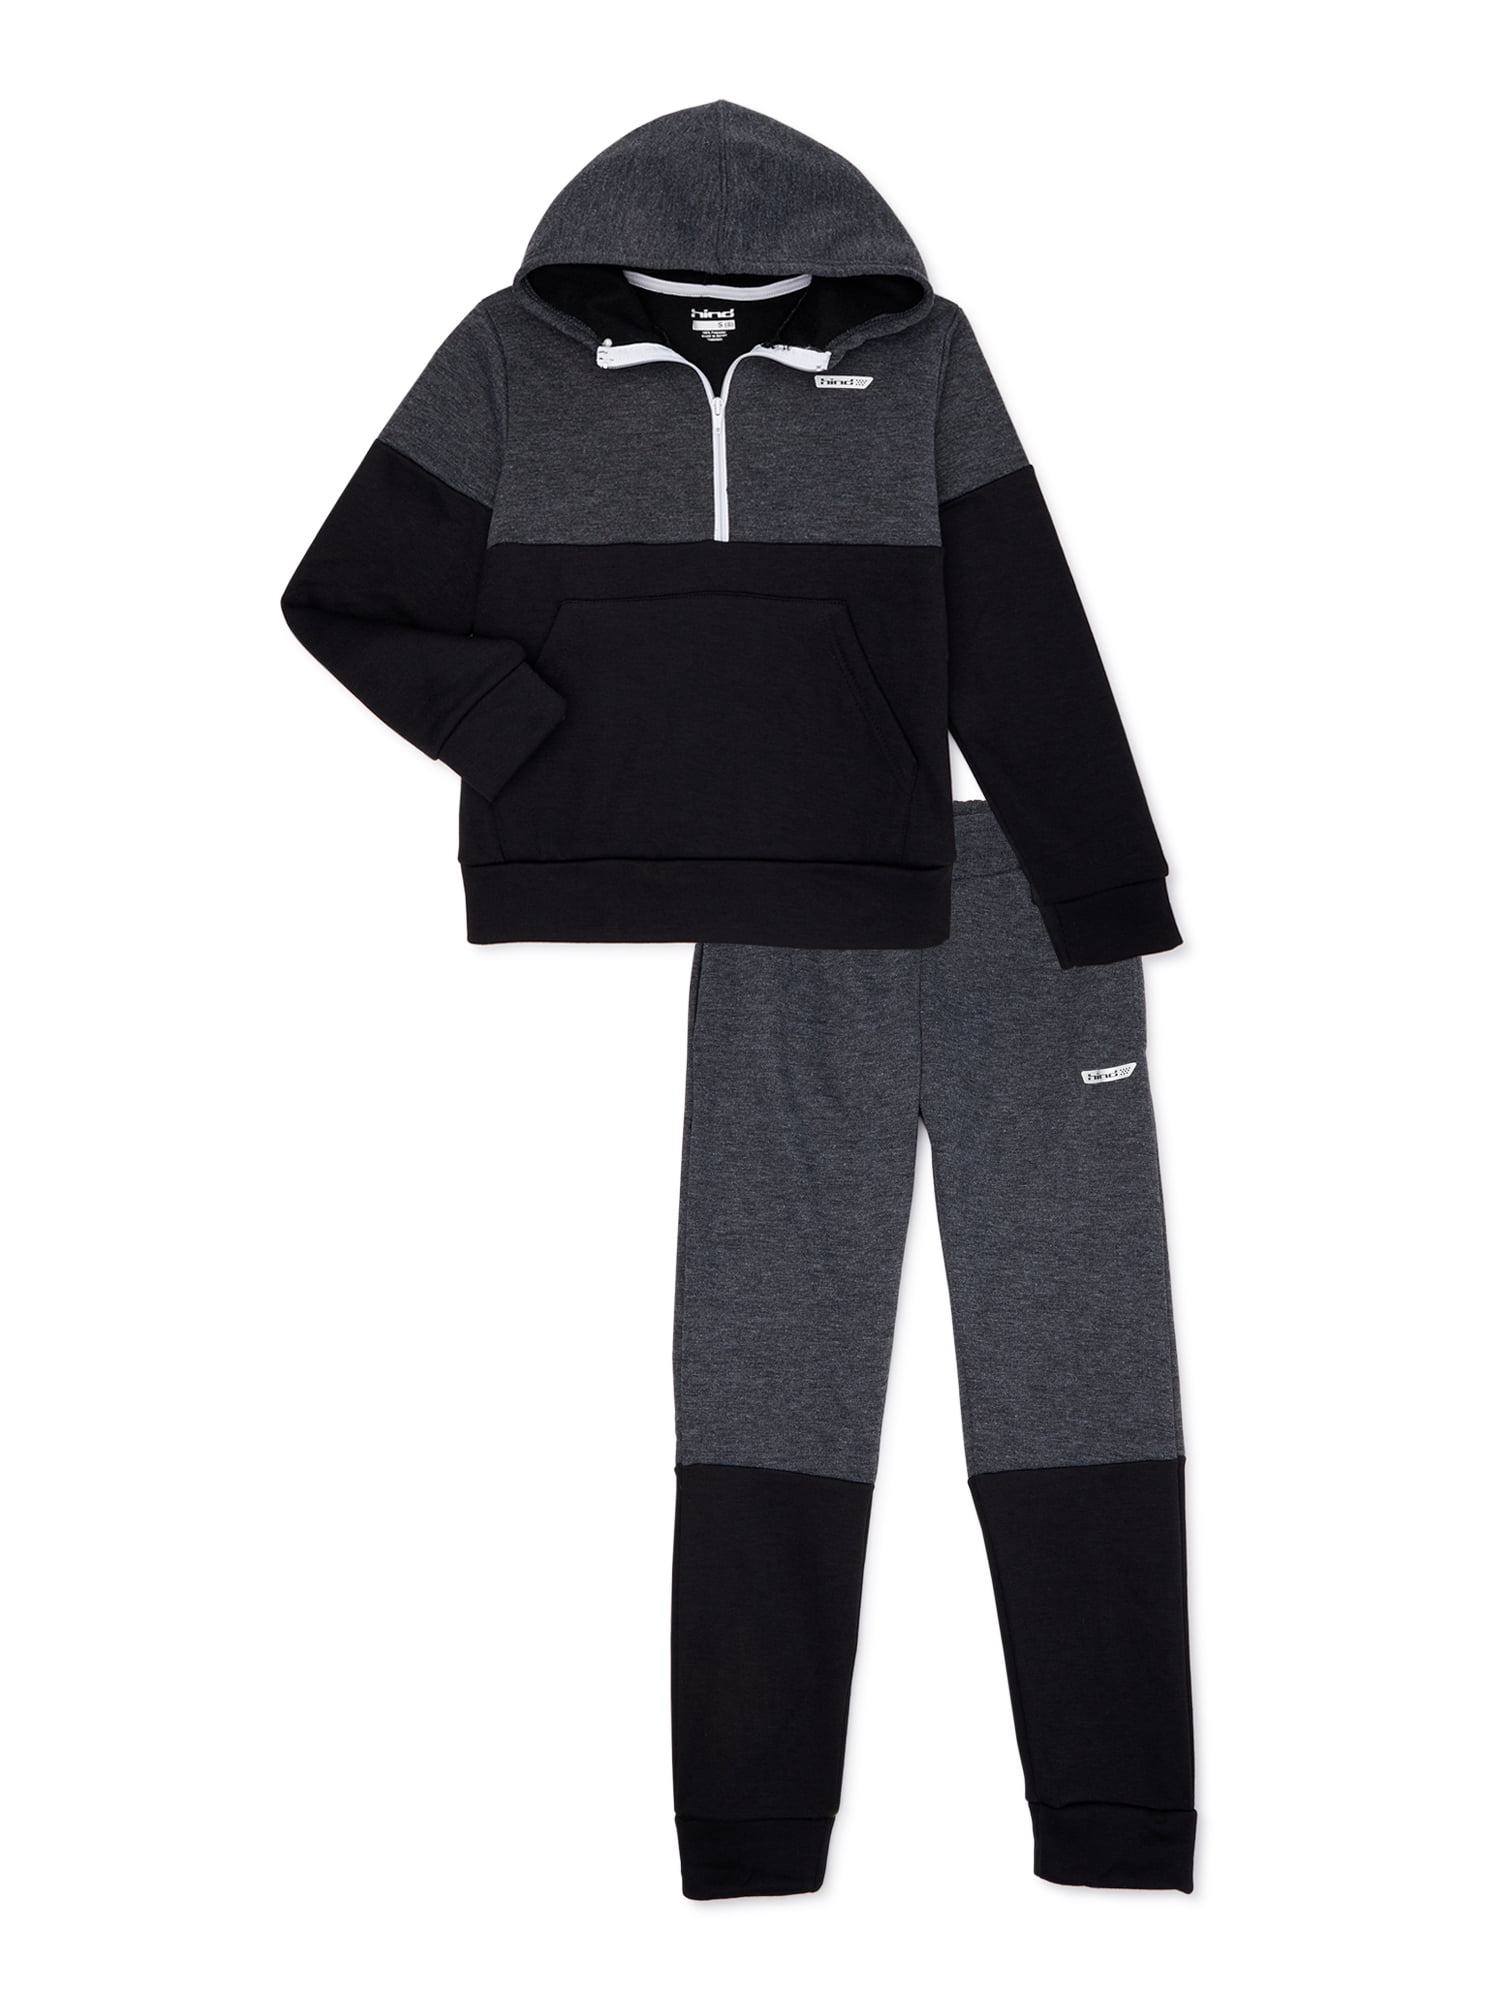 Hind Boys 1/4 Zip Hoodie and Joggers 2-Piece Active Set, Sizes 8-20 ...